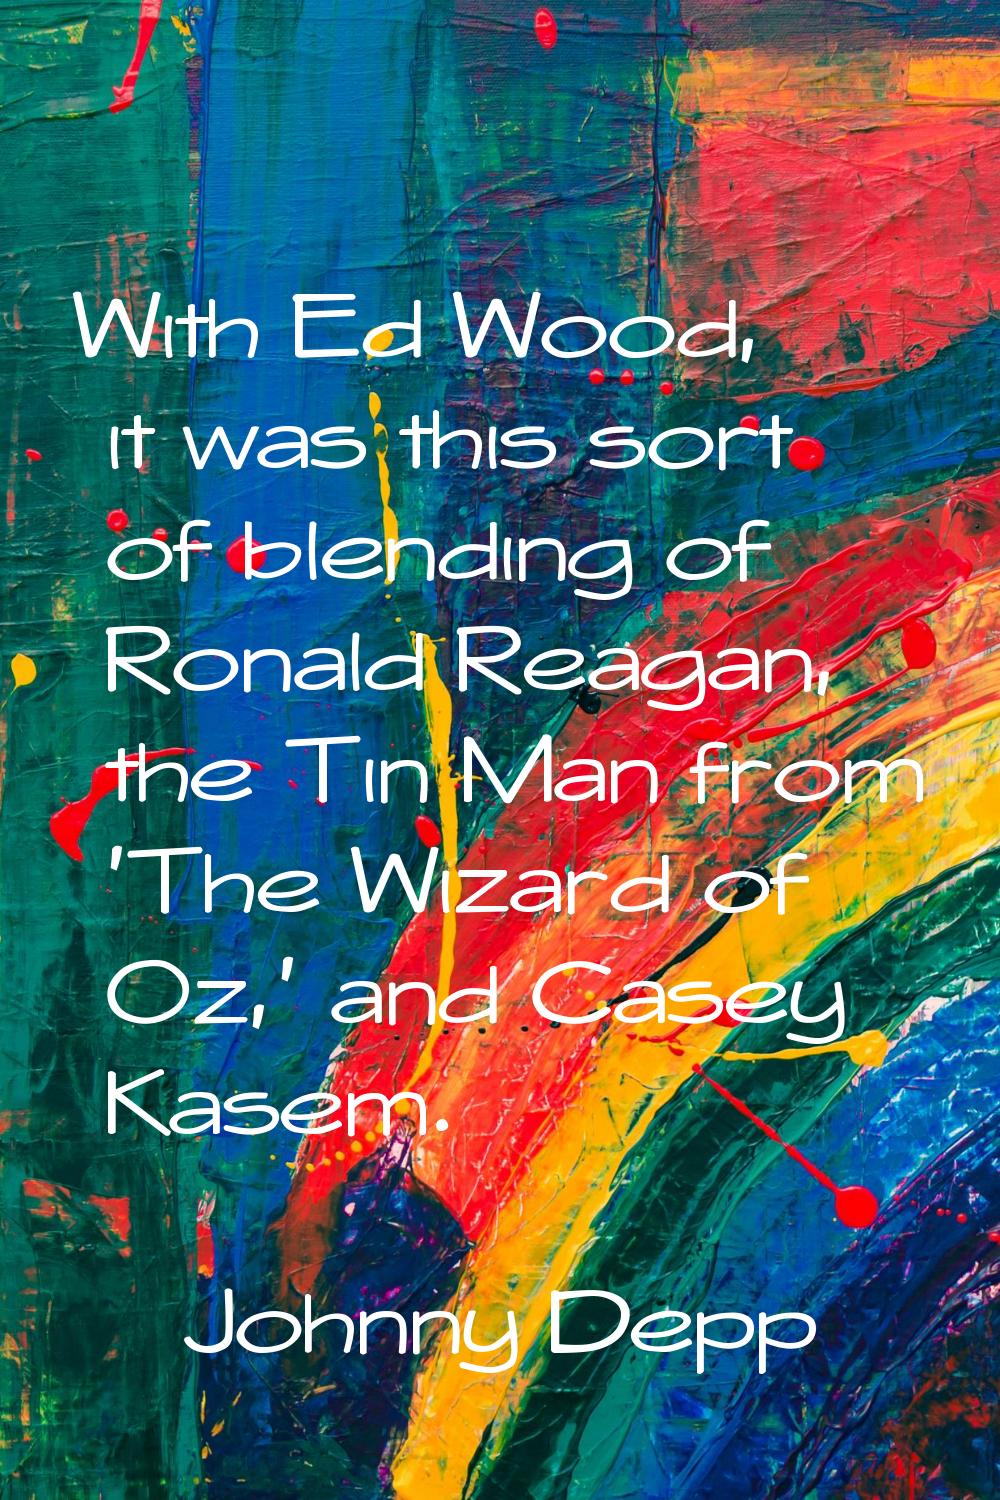 With Ed Wood, it was this sort of blending of Ronald Reagan, the Tin Man from 'The Wizard of Oz,' a